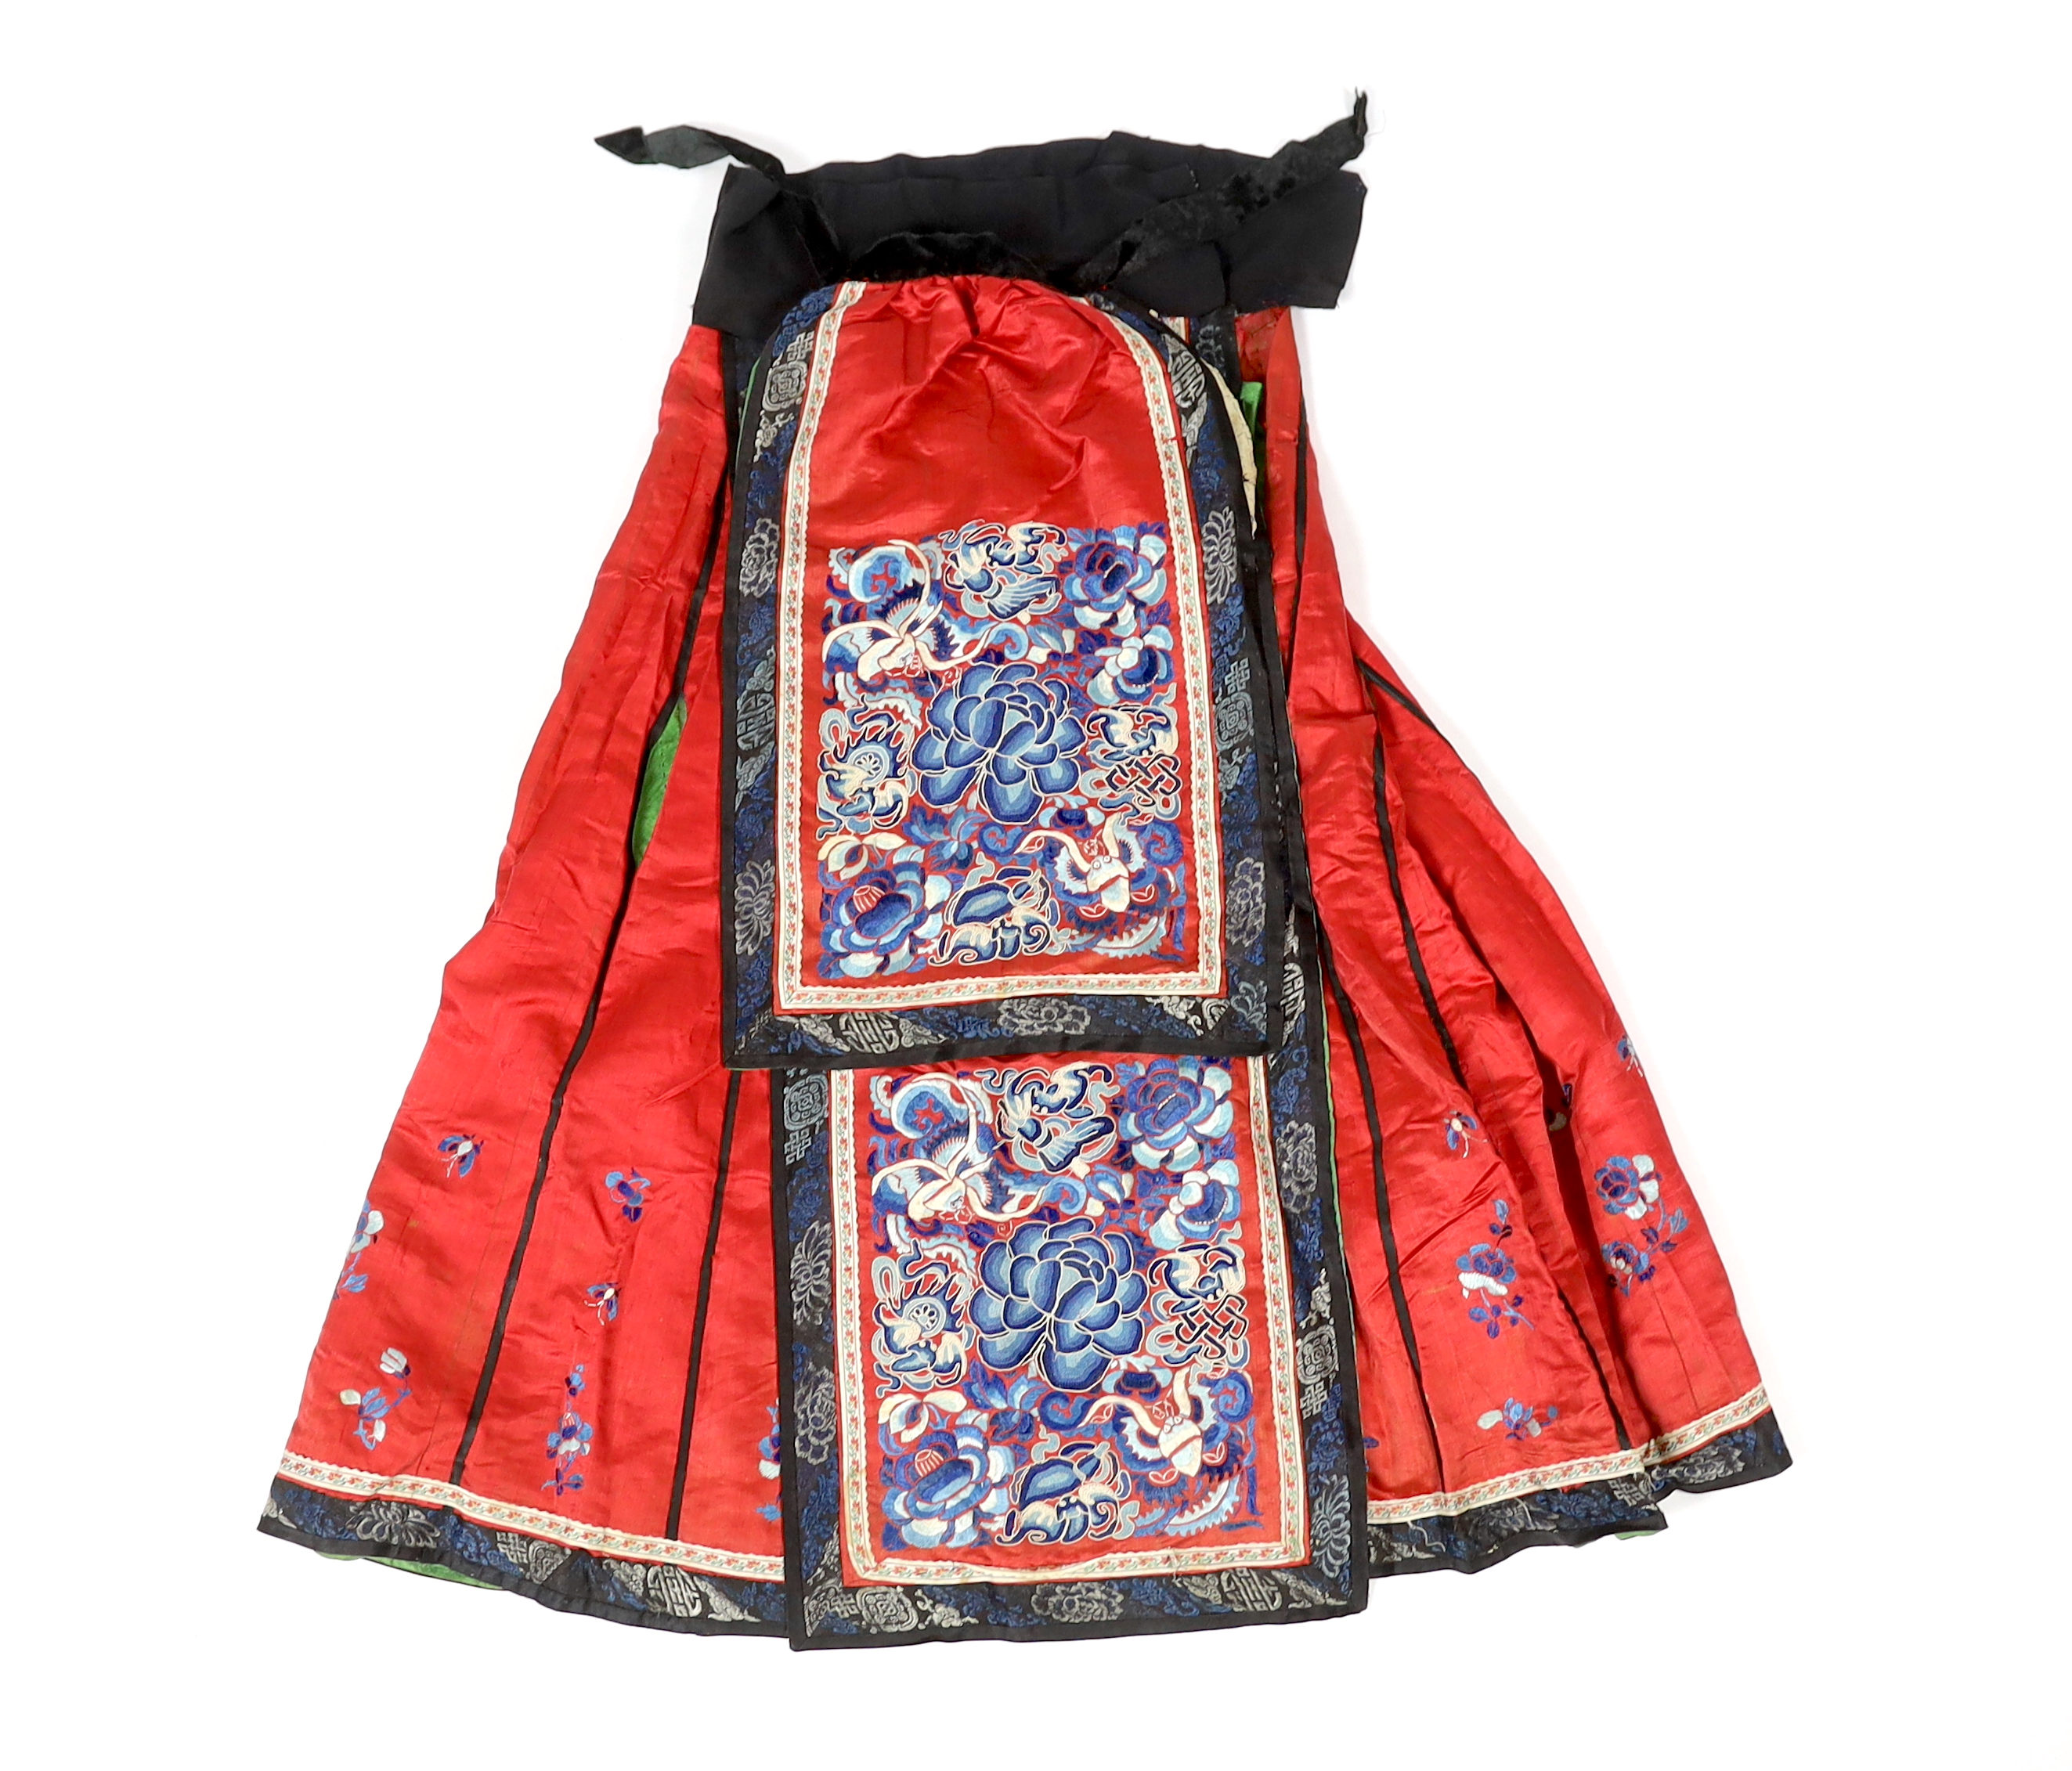 A Chinese red silk skirt, embroidered with a blue silk panel of Chinese knotting flowers and auspicious symbols, the bottom of the skirt with spot motifs bordered with embroidered braiding and ribbon, the slant is lined